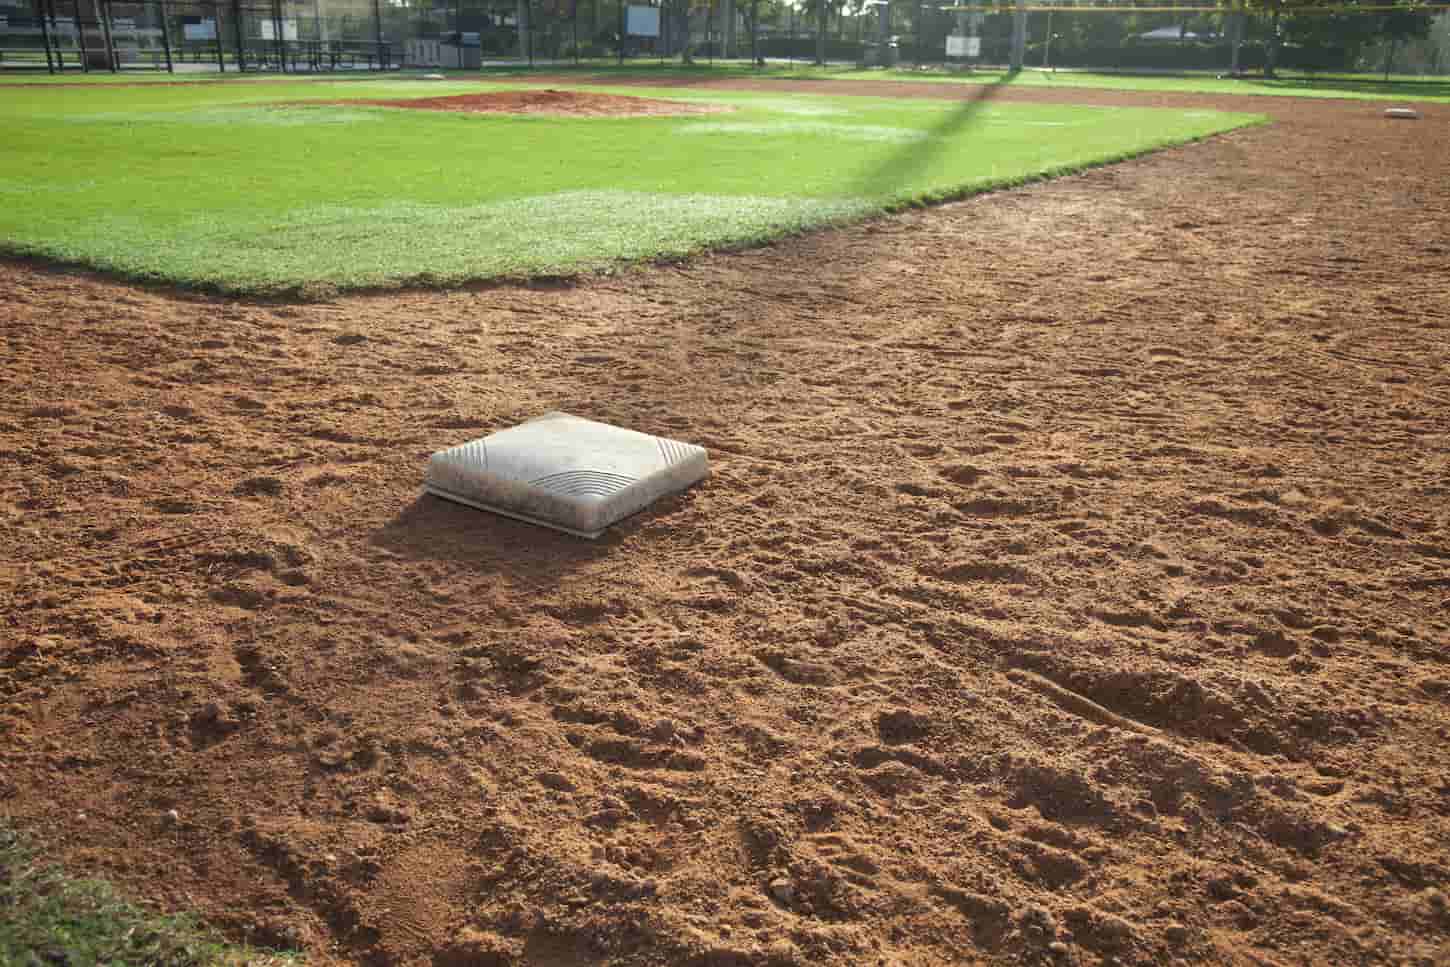 An image of a Baseball Infield in Morning Light on the First Base Side.